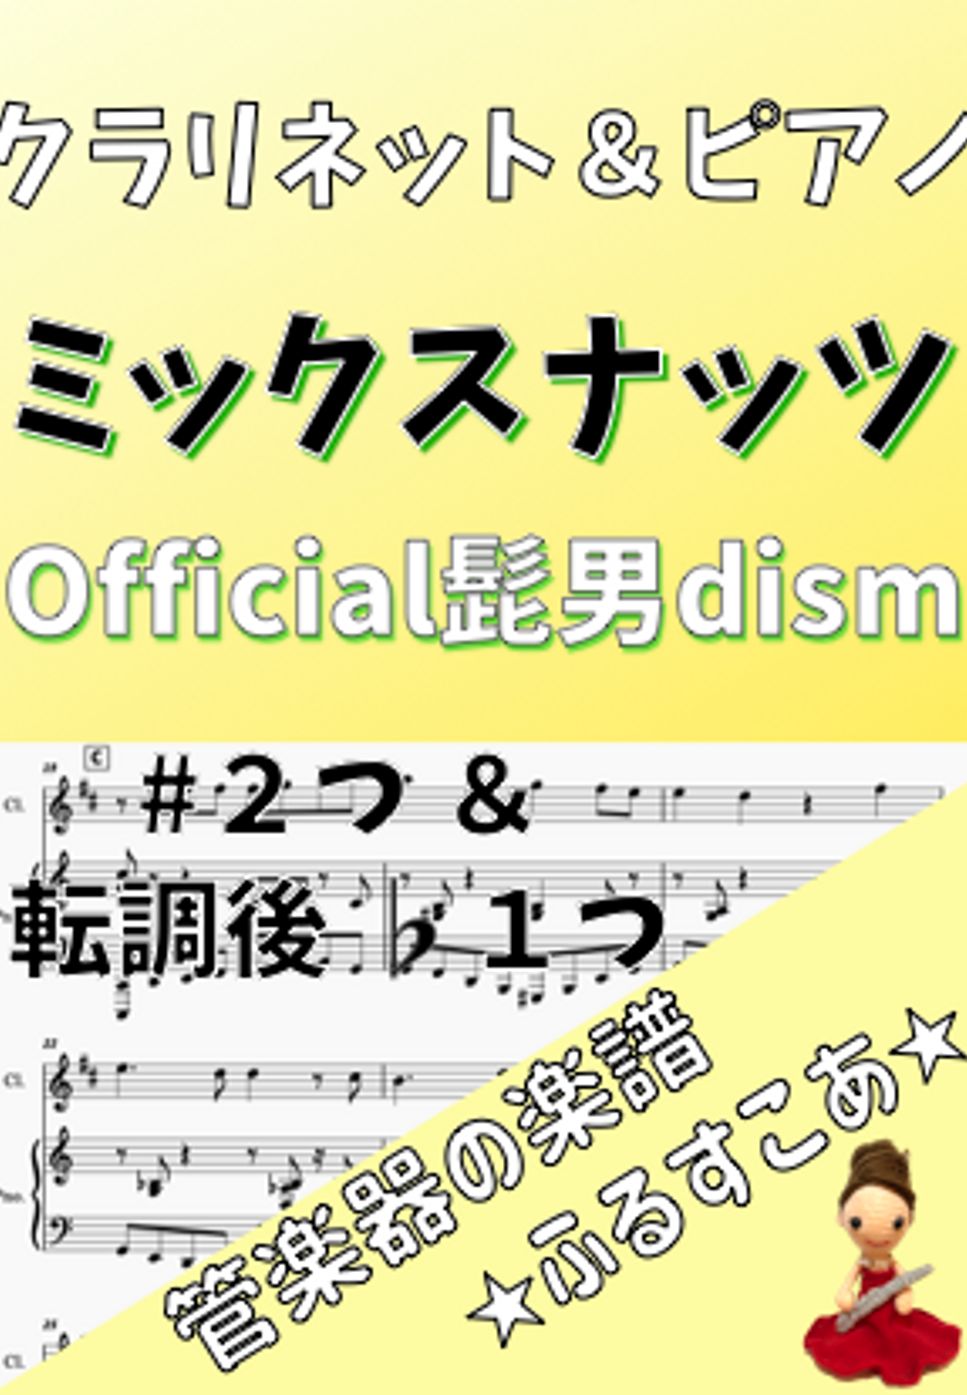 Official髭男dism - 【クラリネット＆ピアノ】#2＆♭1ミックスナッツ（Official髭男dism） by 管楽器の楽譜★ふるすこあ